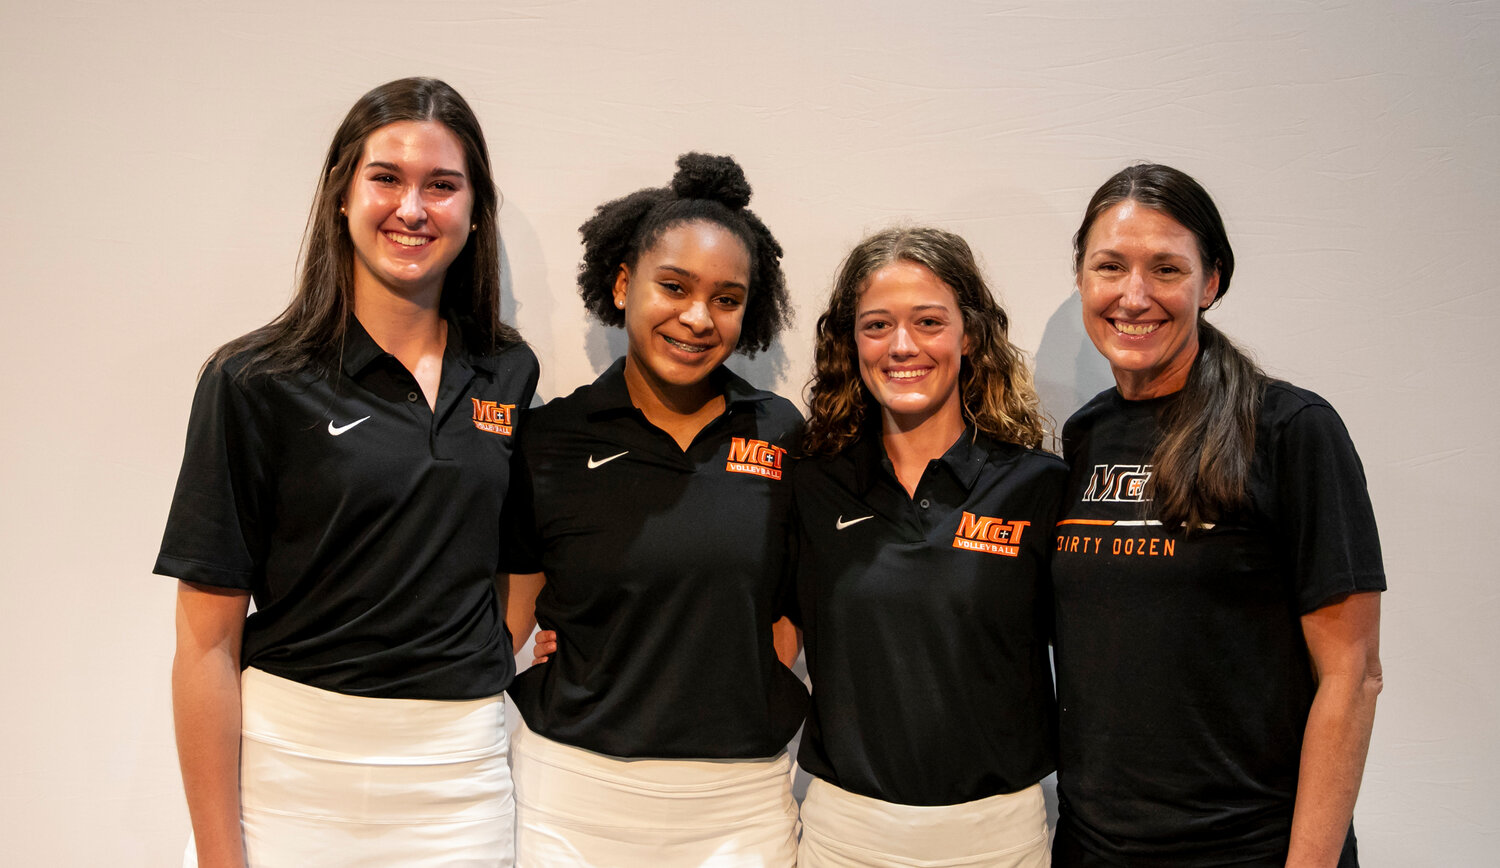 McGill-Toolen’s Emma Moore, Chelsea Daffin, Laura Boykin and head coach Kate Wood took part in the Volleyball Media Day at Trojan Hall in Daphne on Monday, Aug. 7, where Wood said this senior leadership group has had the best start to a season in her nine years at the helm. Once again, the Yellow Jackets enter the season as defending champions after claiming the Class 7A crown last year.